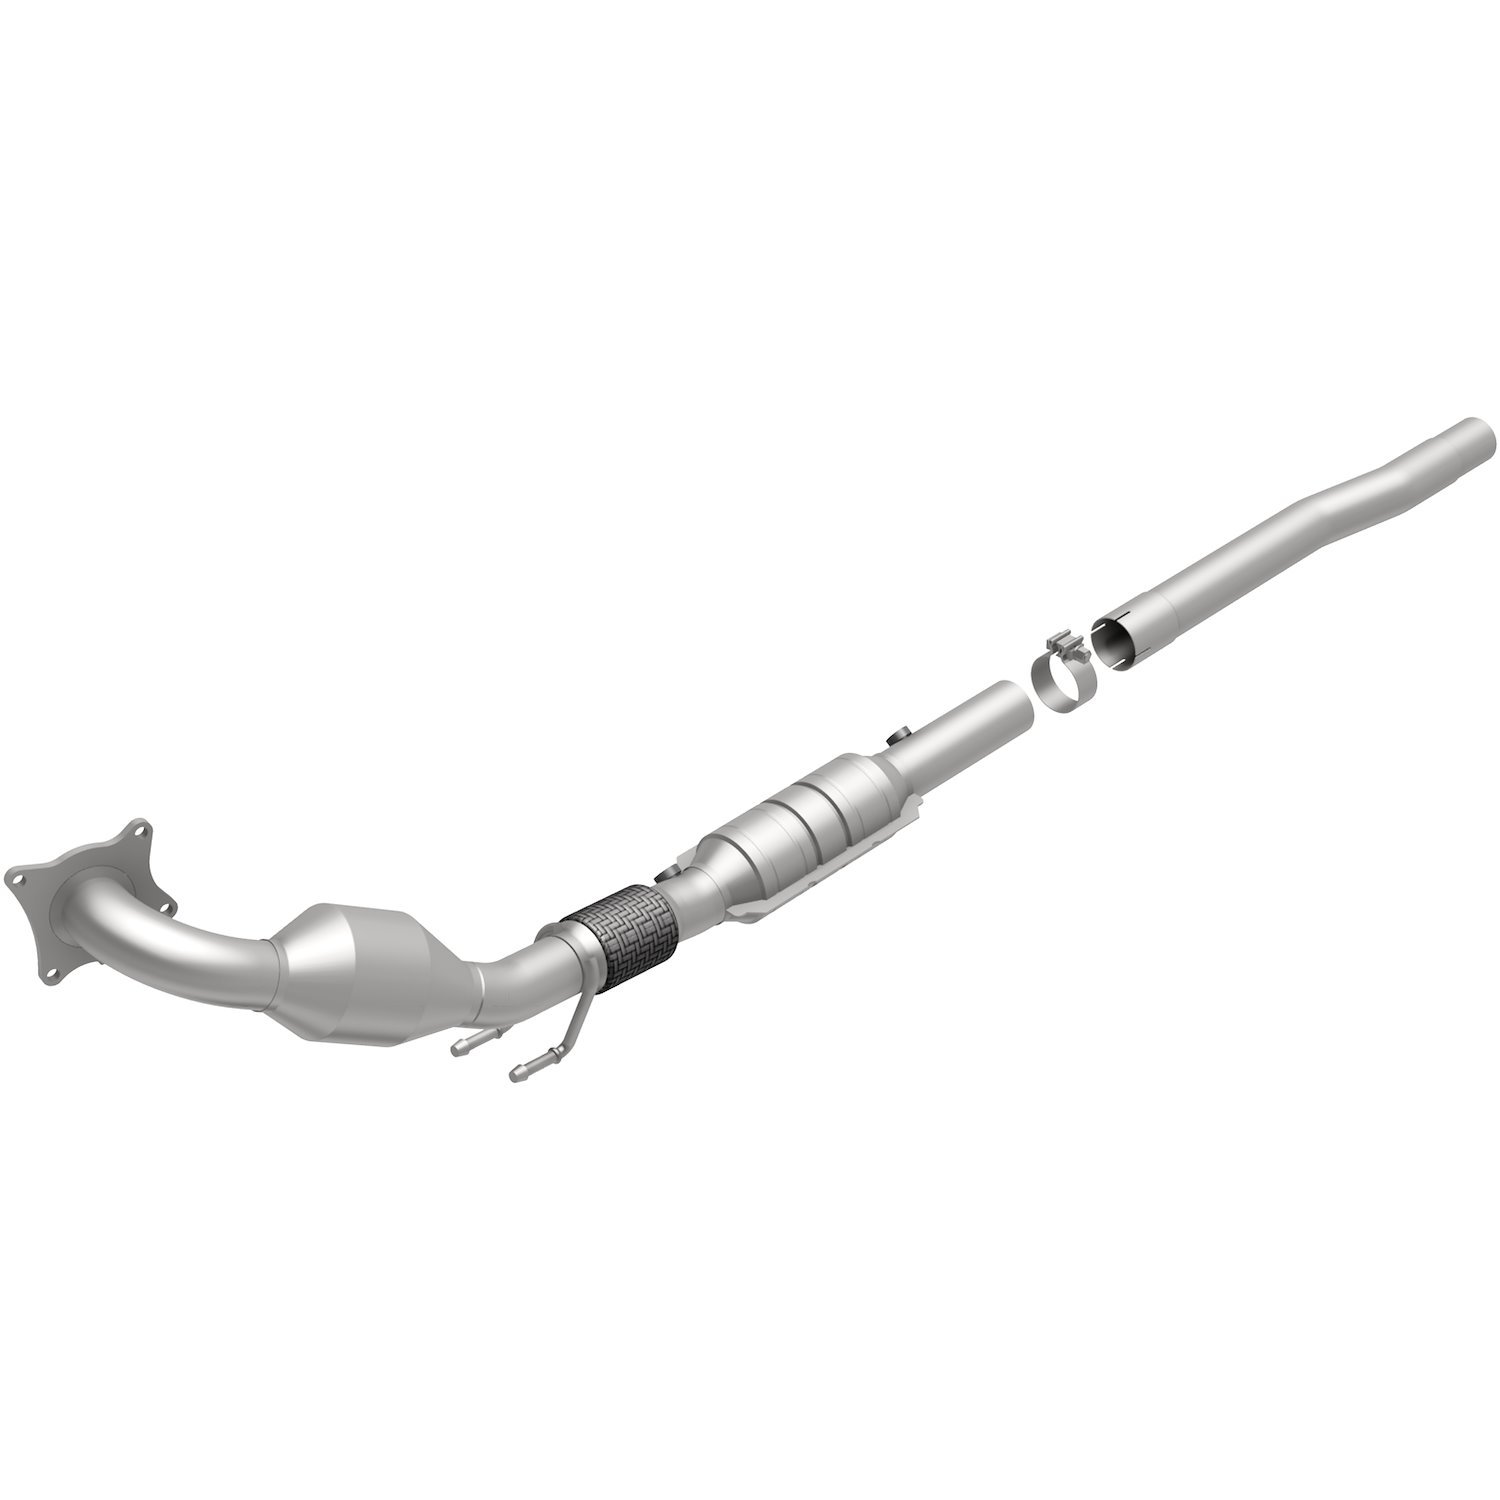 OEM Grade Federal / EPA Compliant Direct-Fit Catalytic Converter 49887